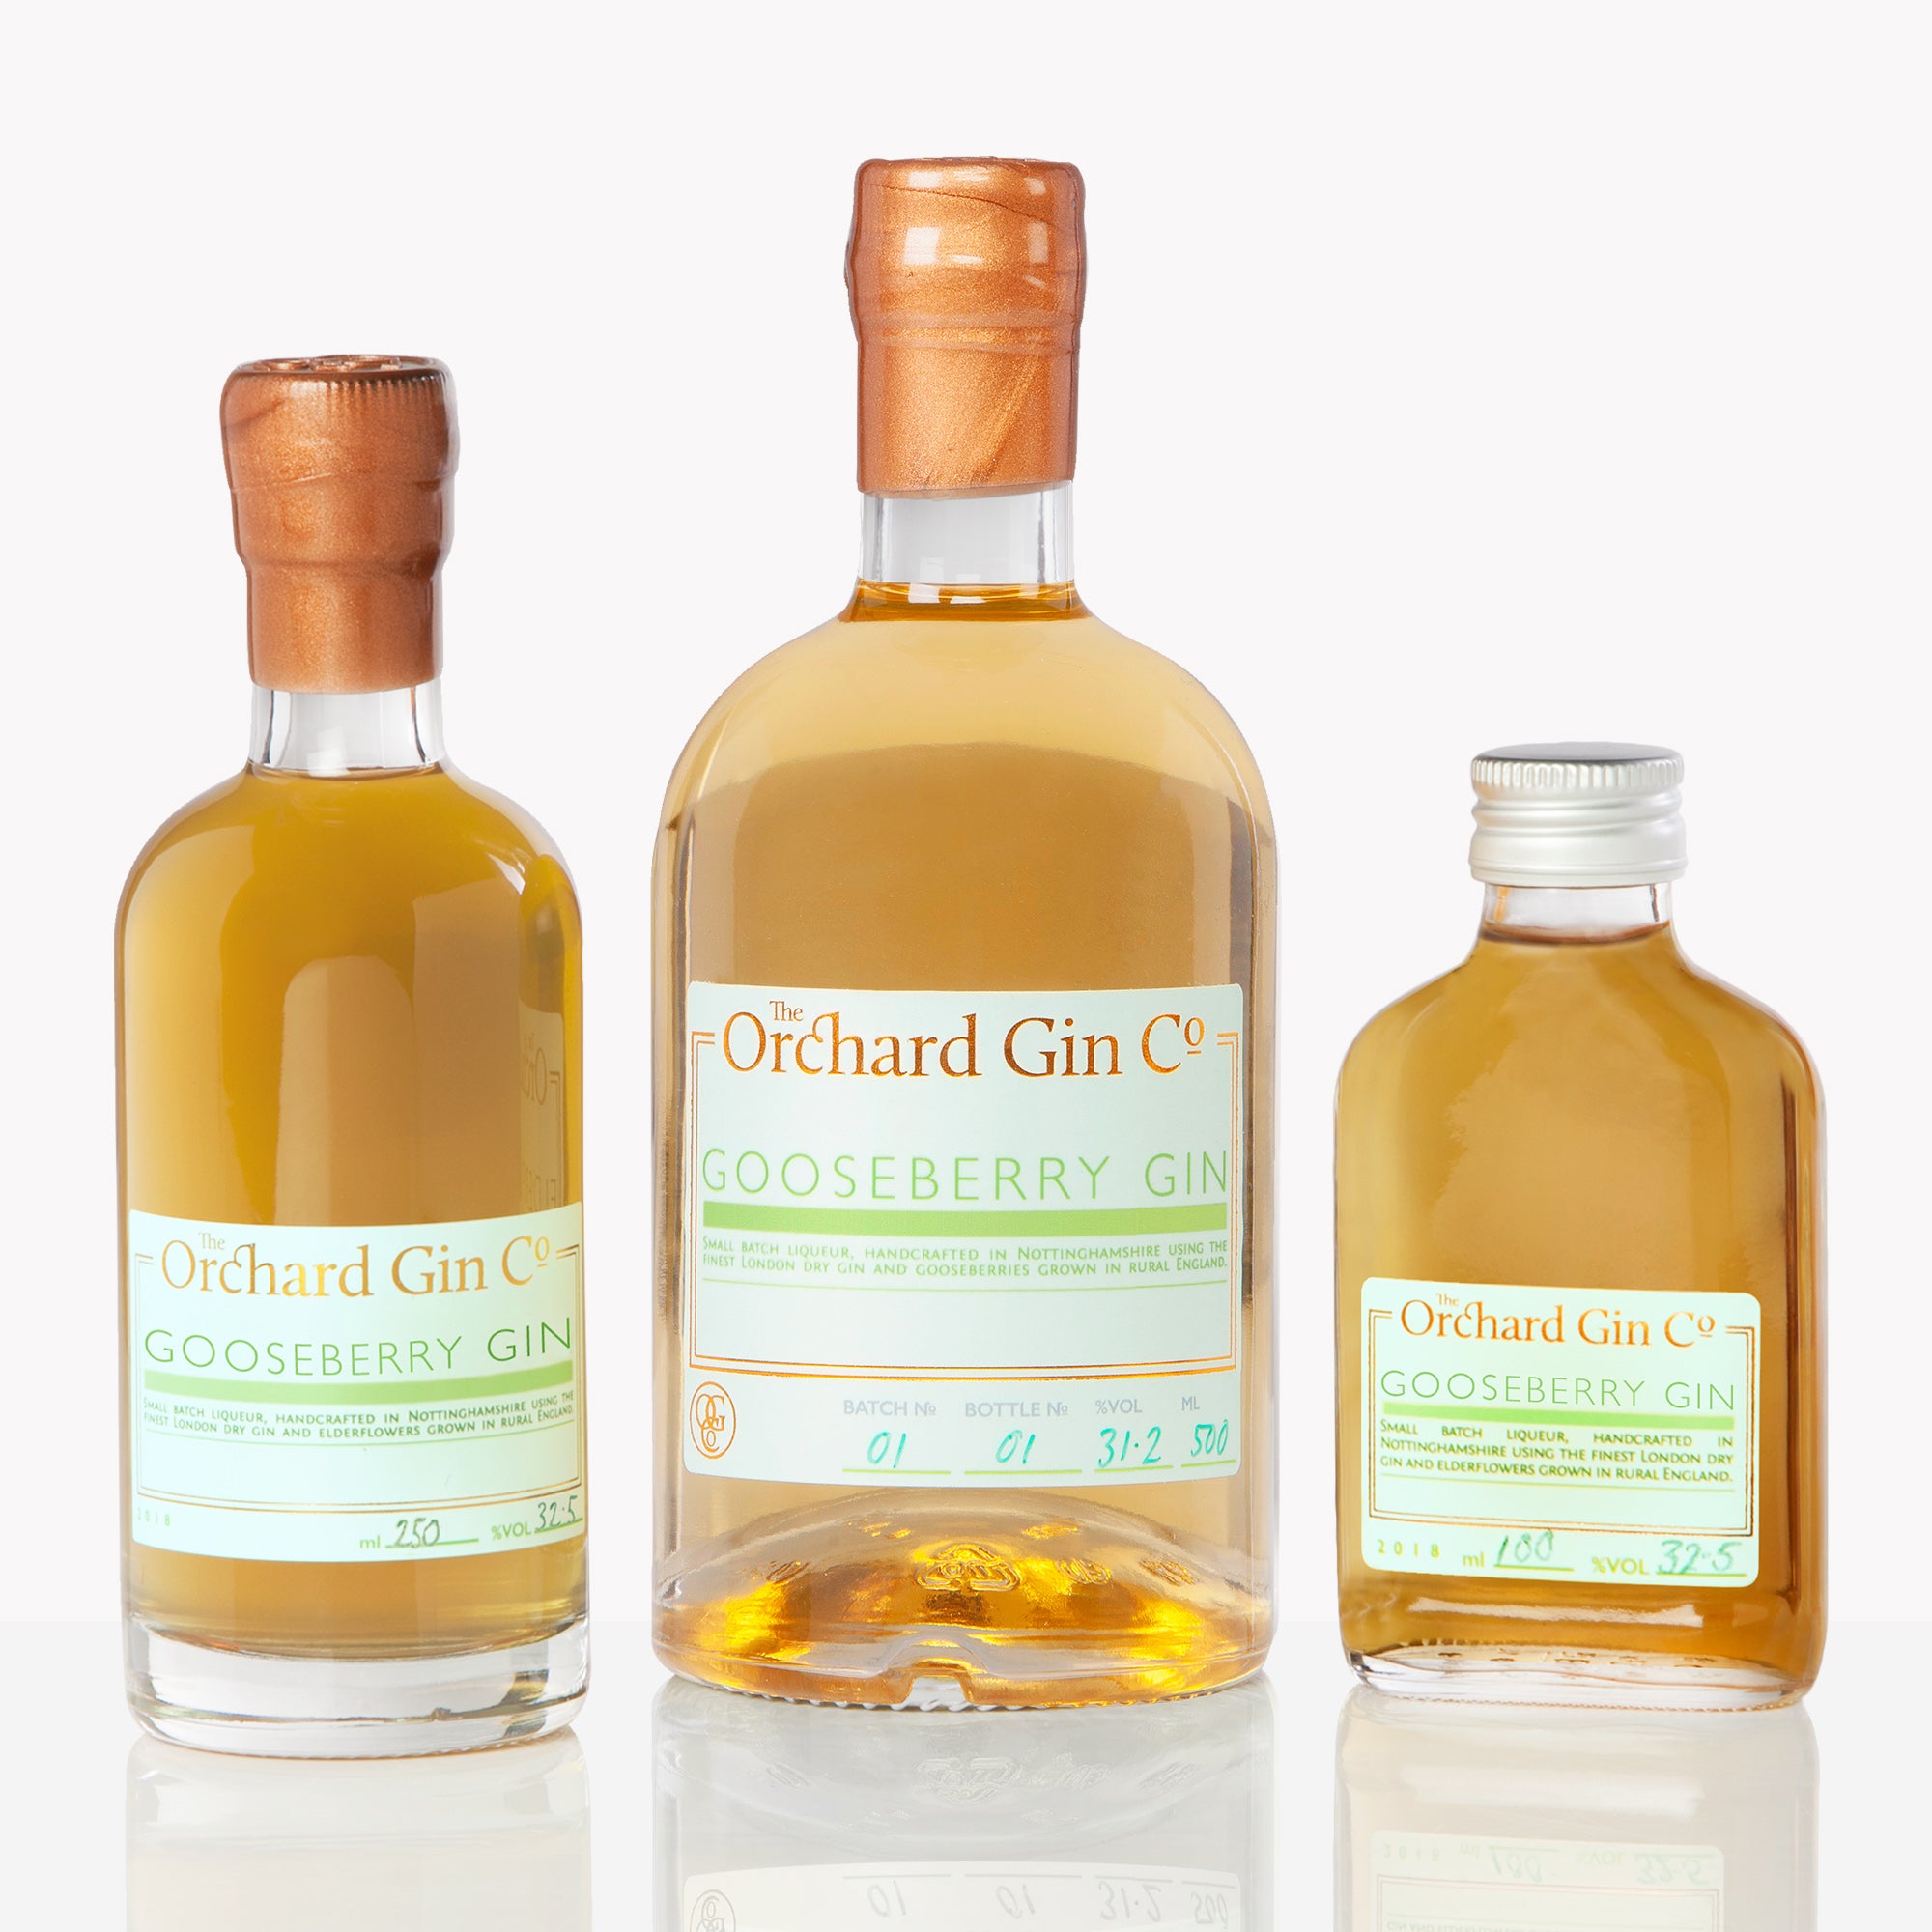 Gooseberry Gin - The Orchard Gin Co